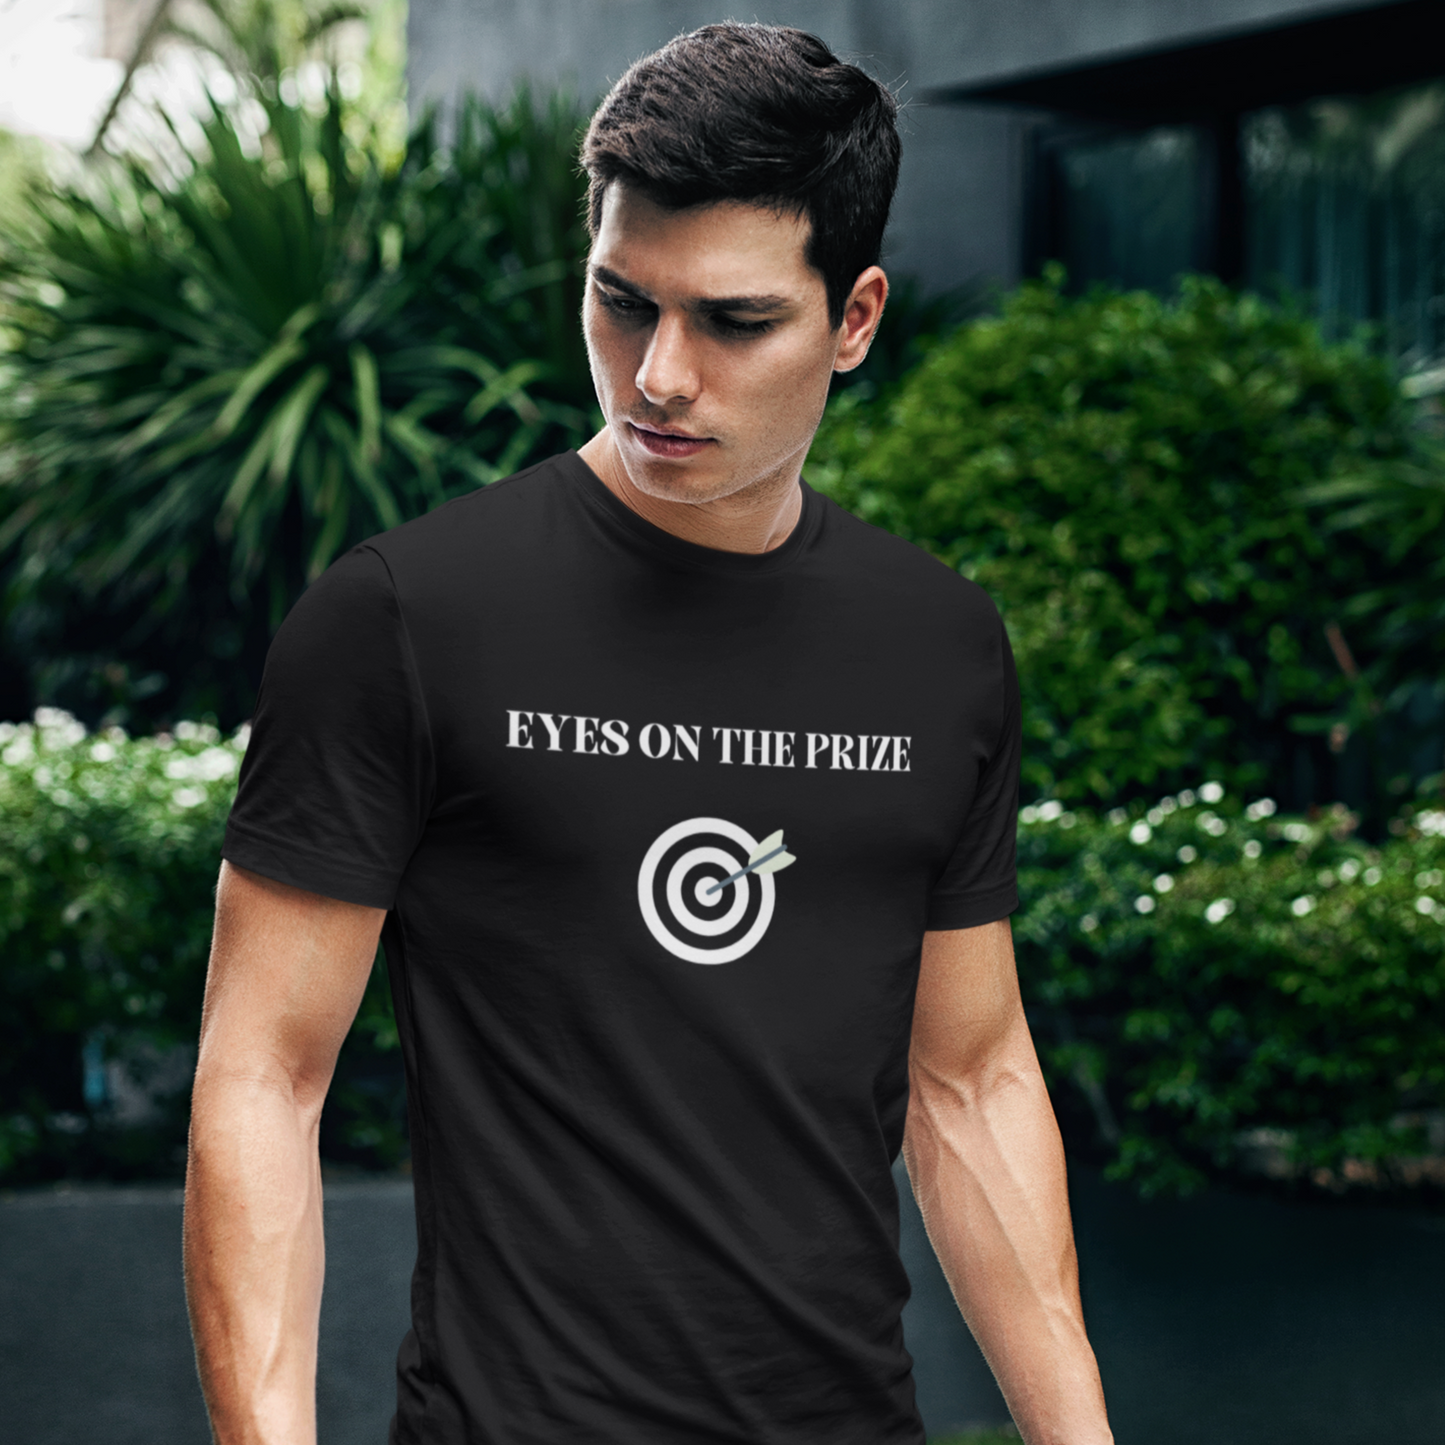 Eyes on the prize inspirational words t shirts, t shirts that motivates tee shirt gift for friends